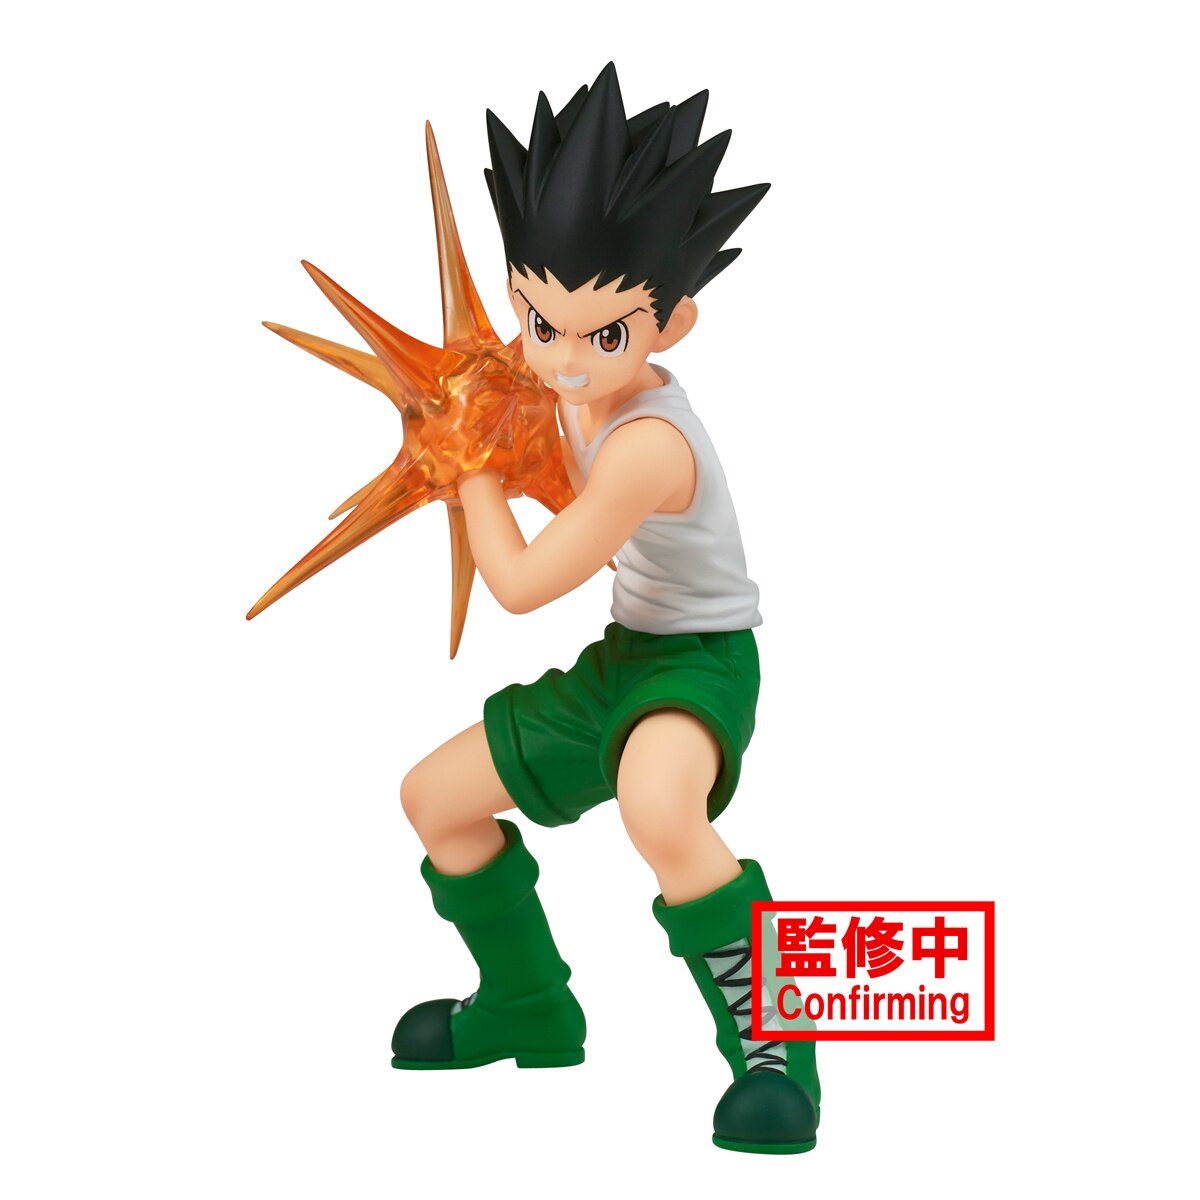 How old is Gon from Hunter x Hunter?